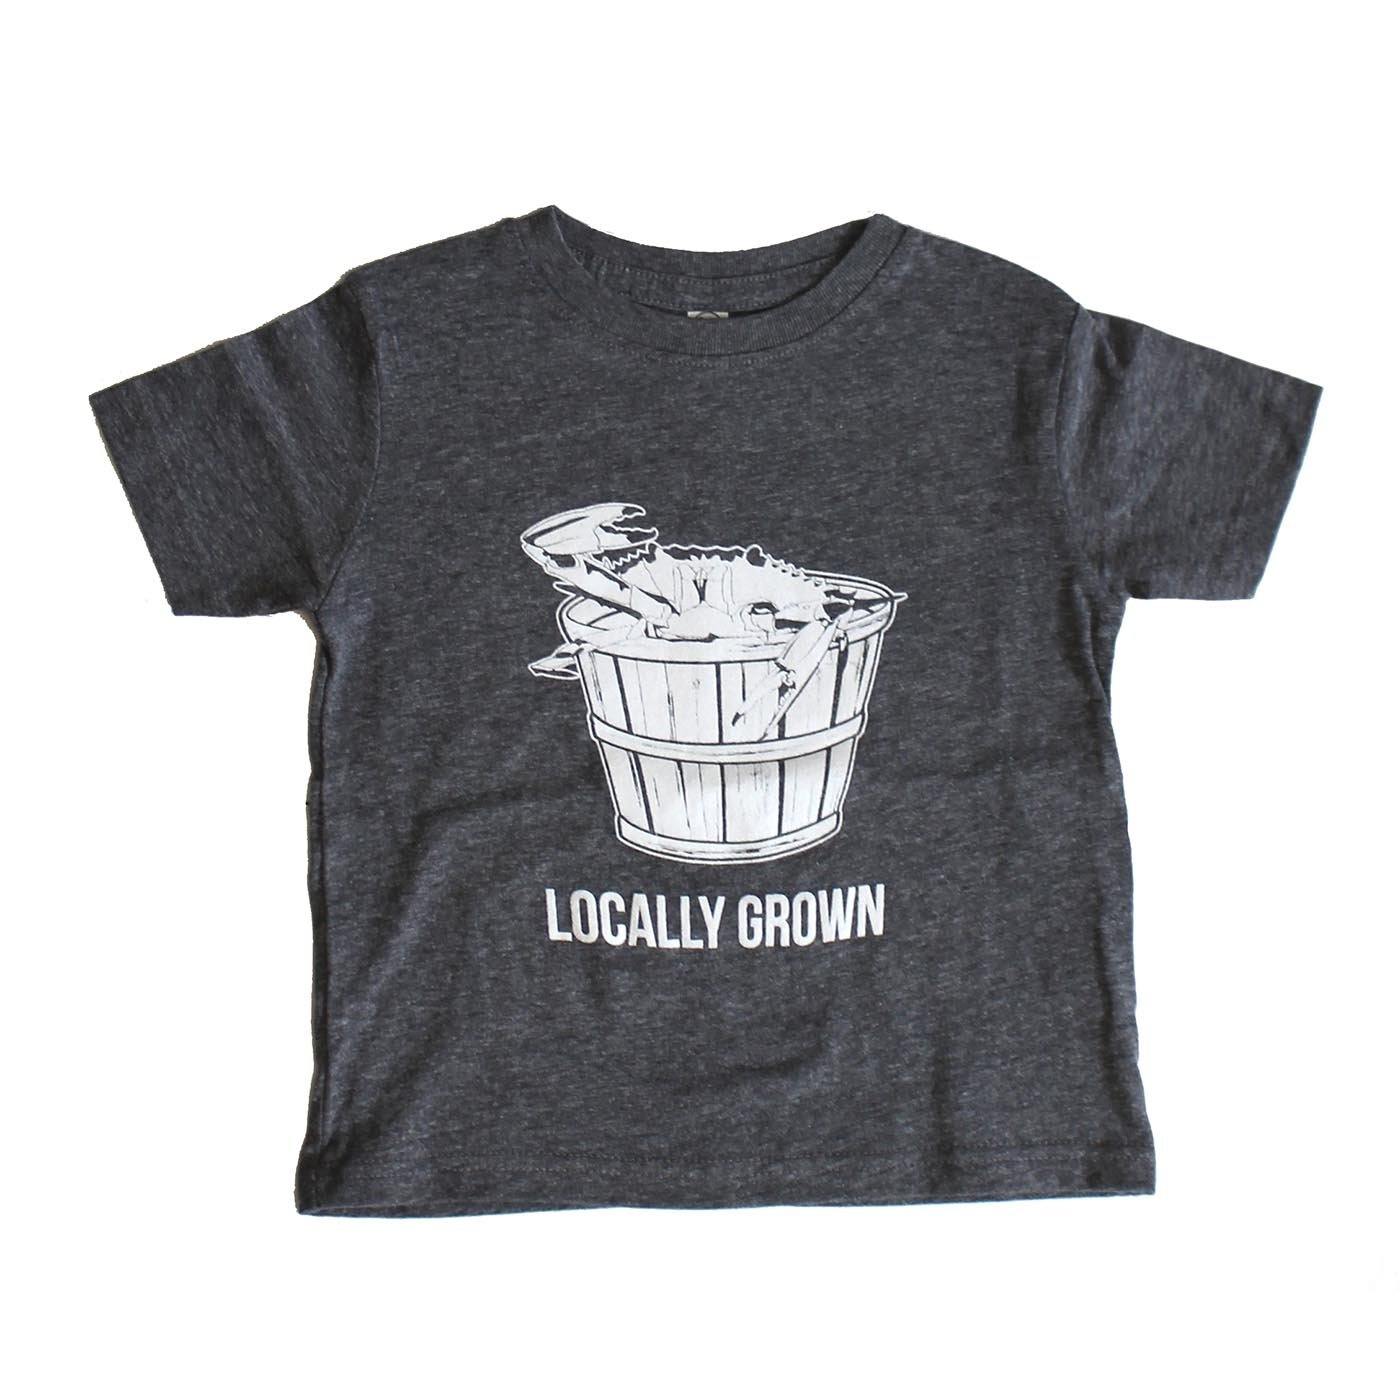 Locally Grown (Granite Heather) / *Toddler* Shirt - Route One Apparel